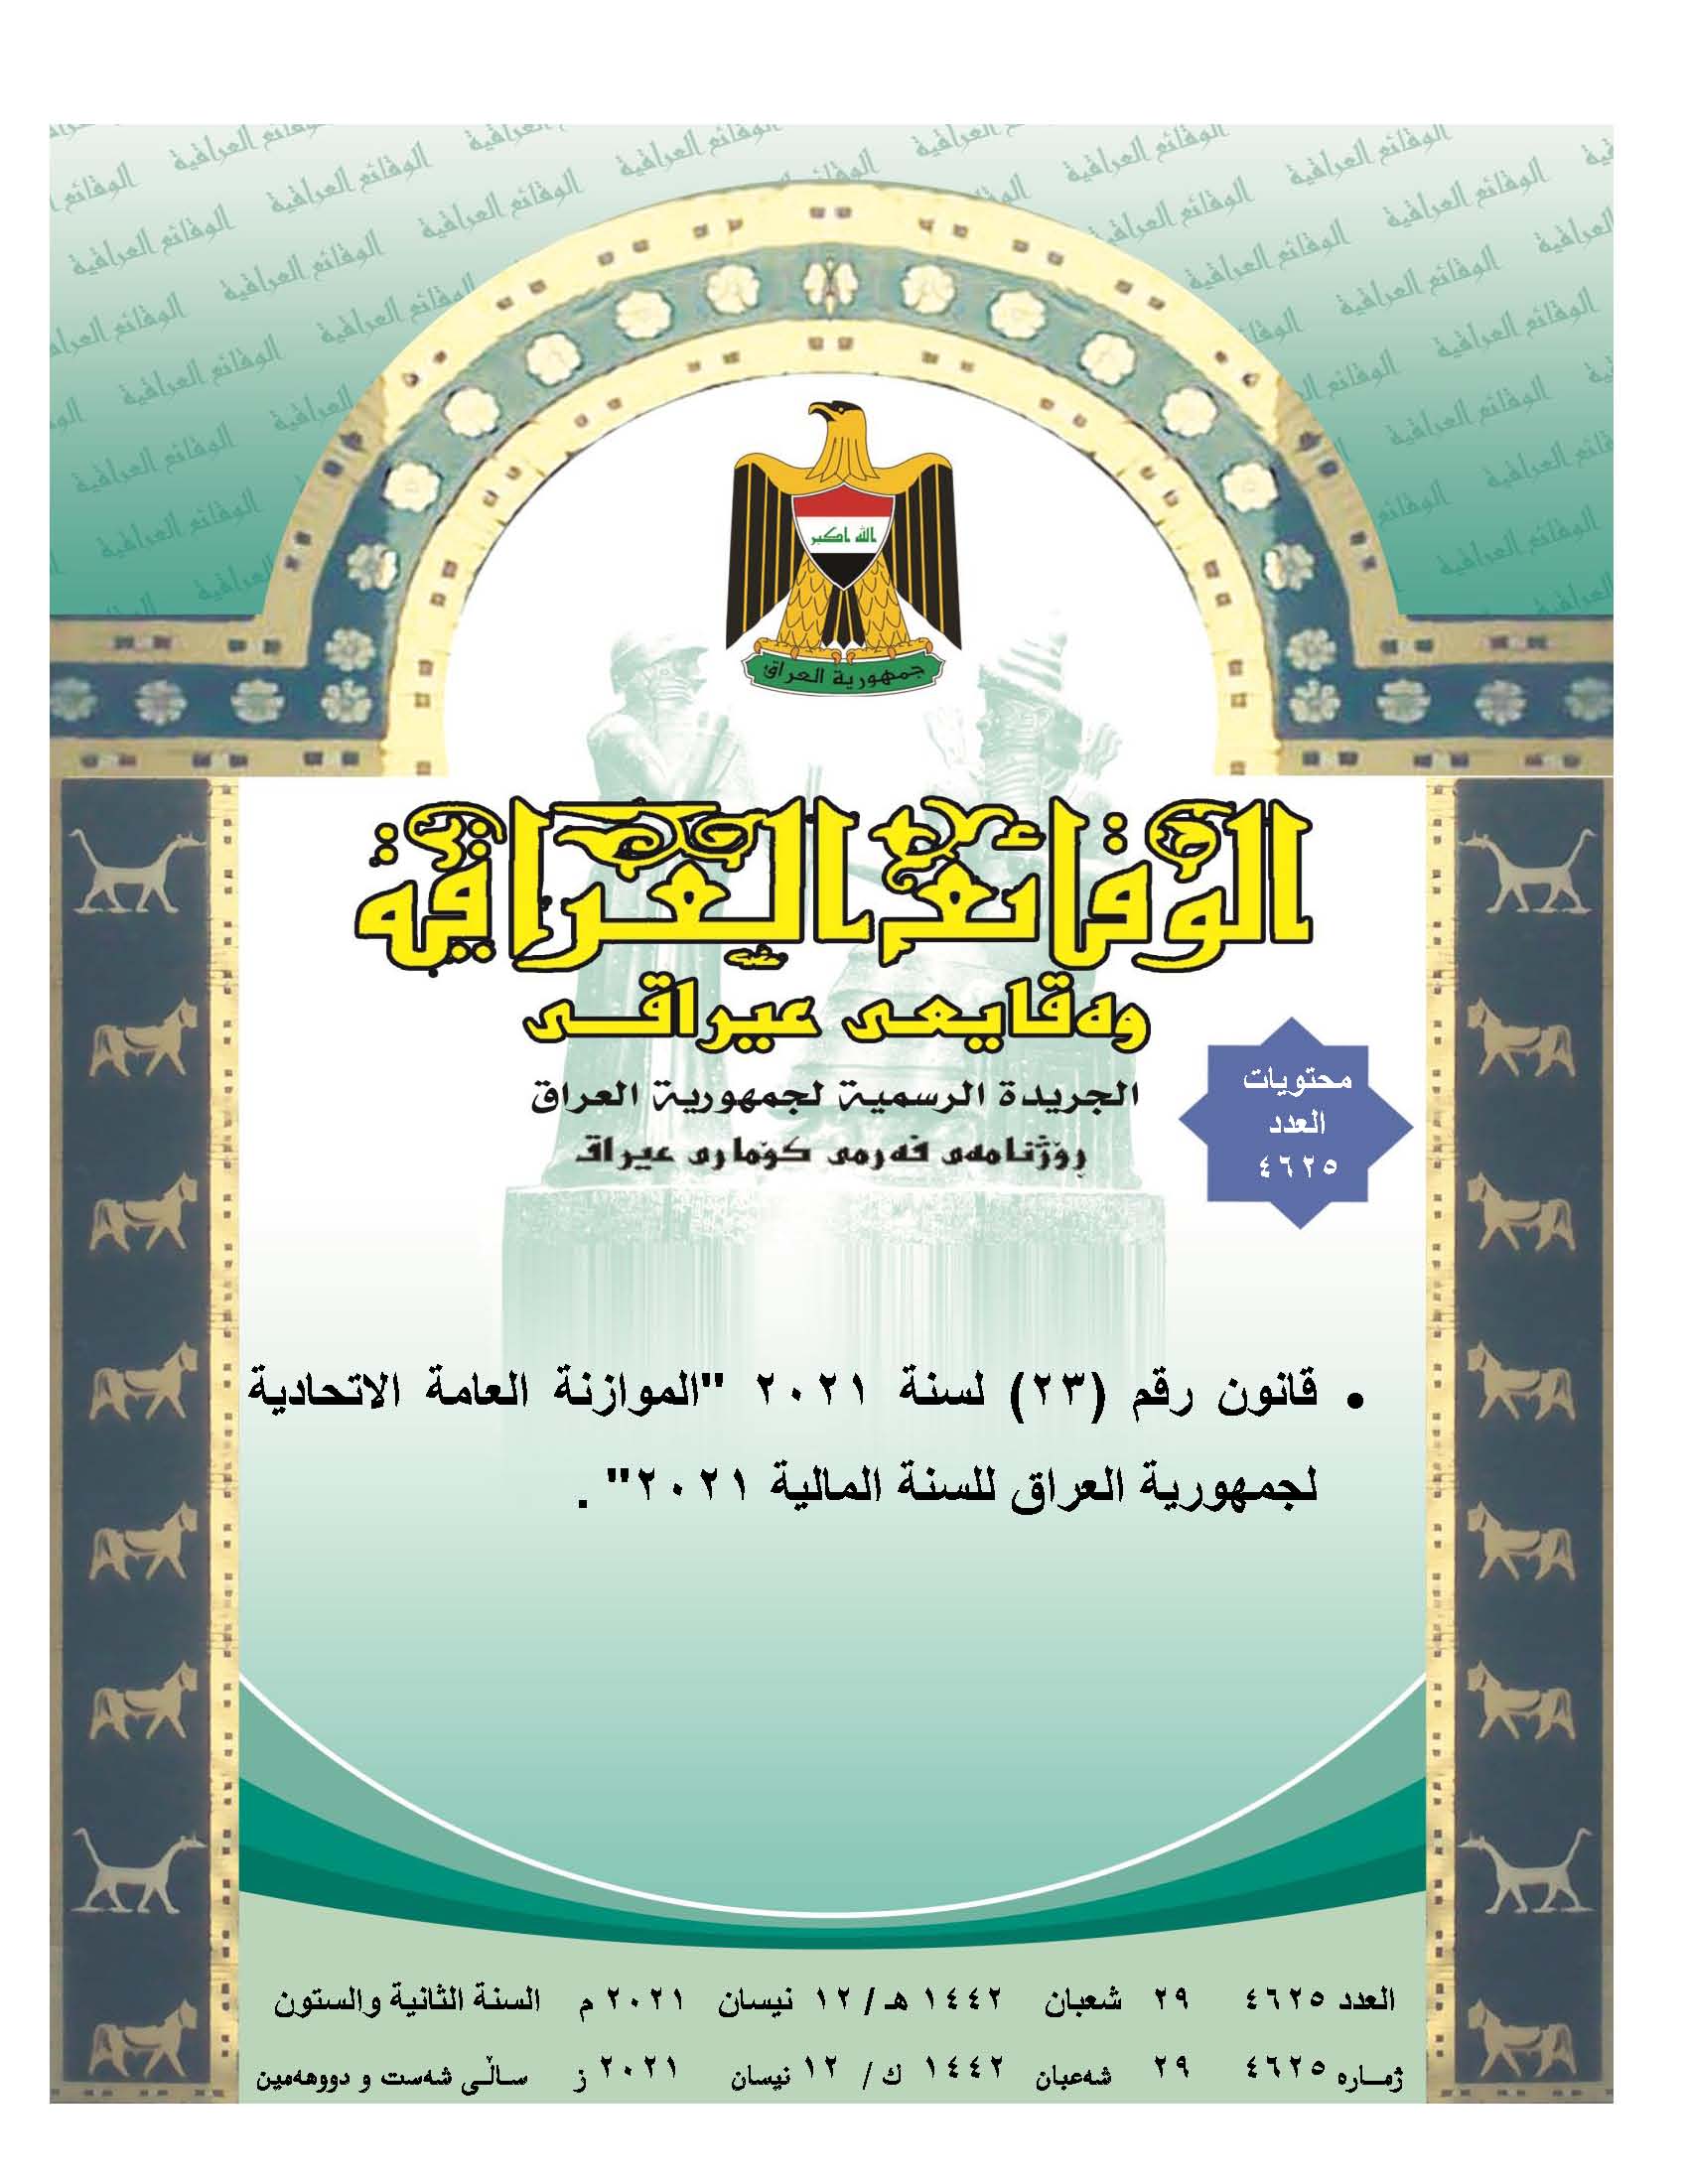 Issue (4625) of the Iraqi newspaper Al-Waqi’a issued on 12/4/2021